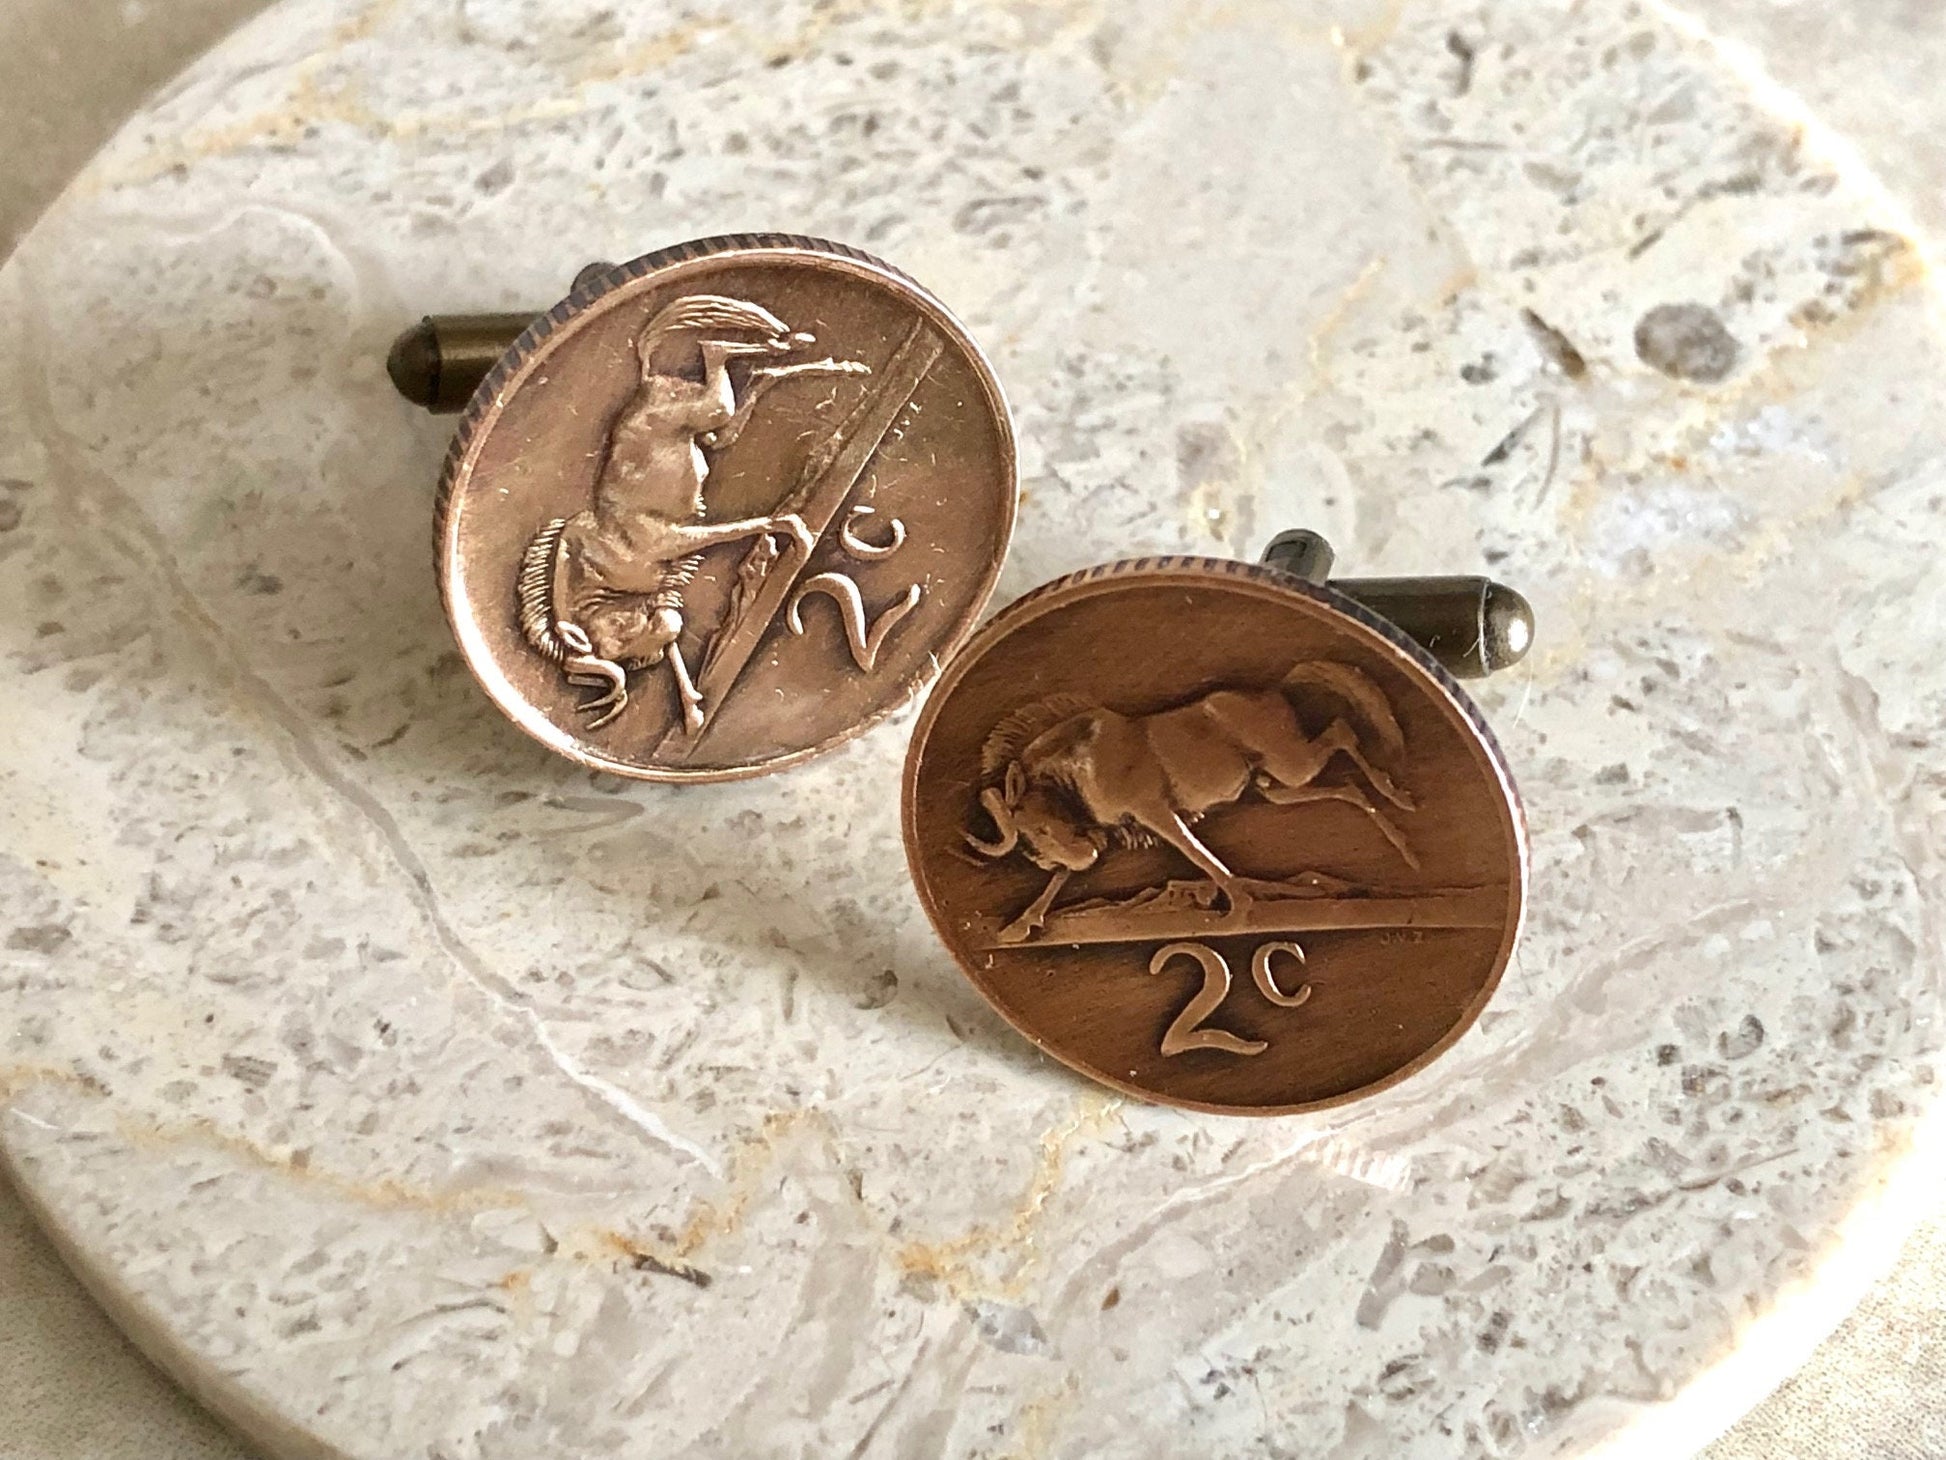 South Africa Coin Cuff Links African 2 Cents Personal Cufflinks Vintage Handmade Jewelry Gift Friend Charm For Him Her World Coin Collector